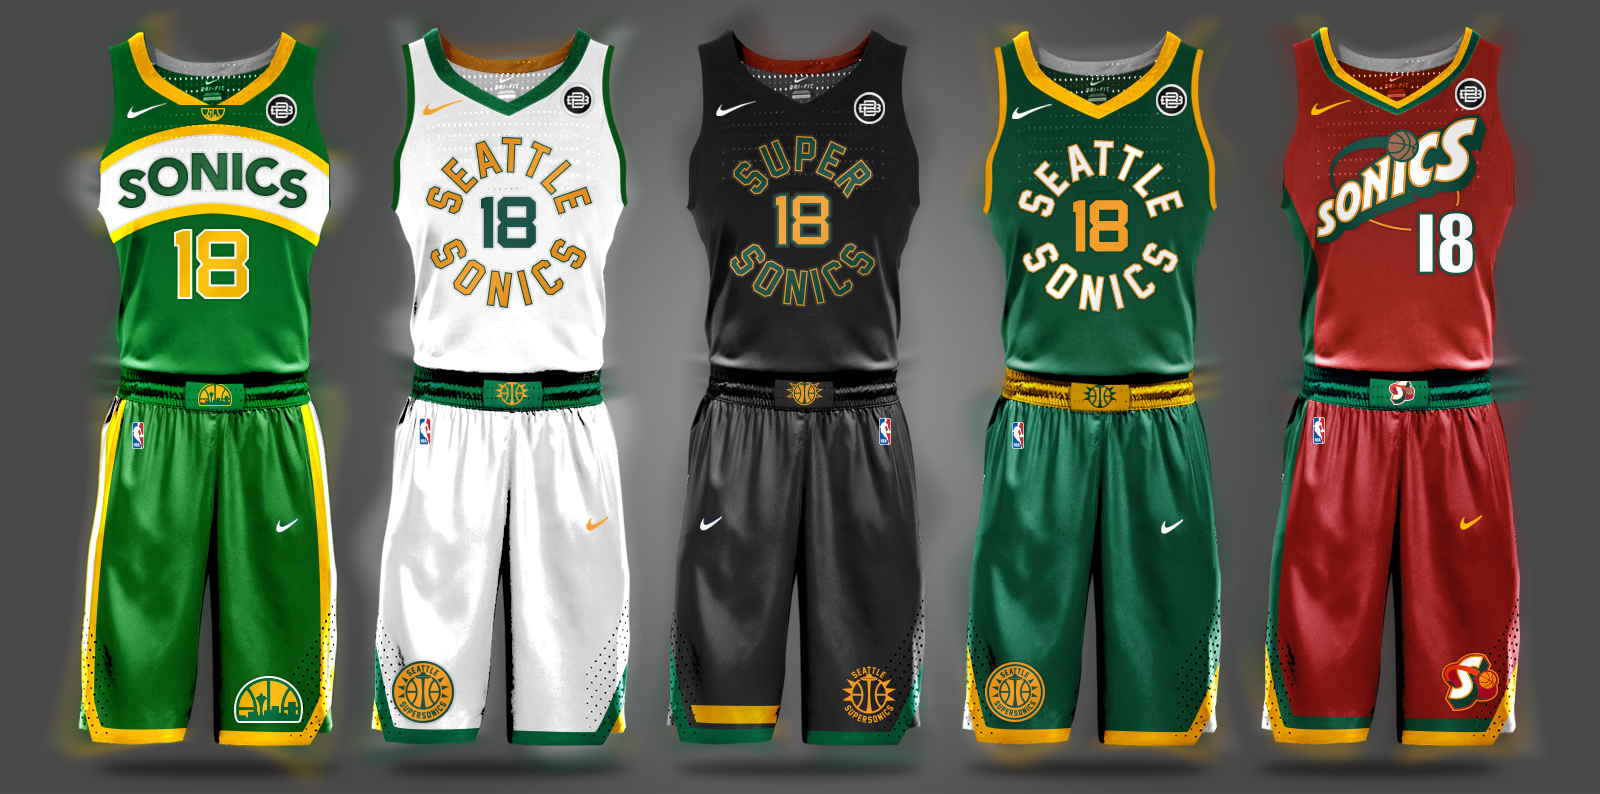 seattle supersonics jersey and shorts